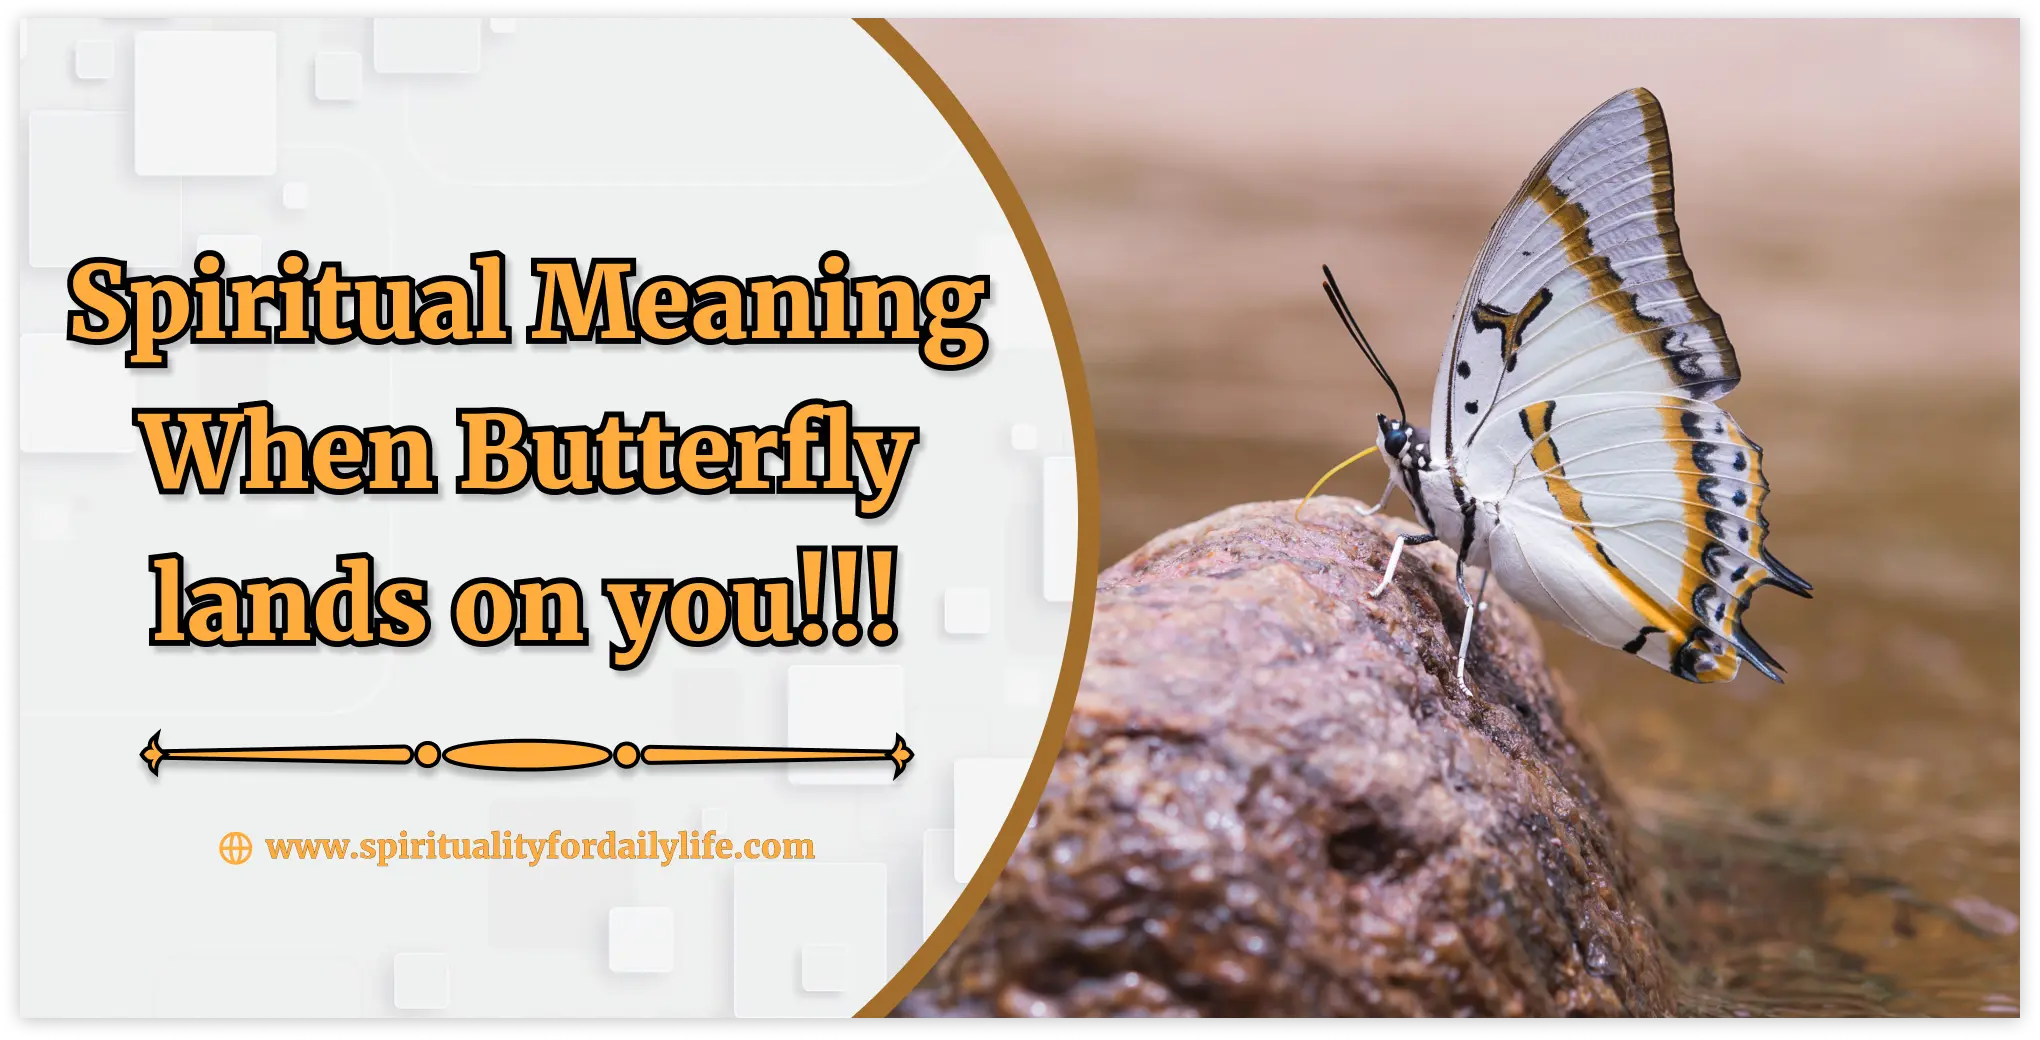 Spiritual Meaning When Butterfly lands on you!!!